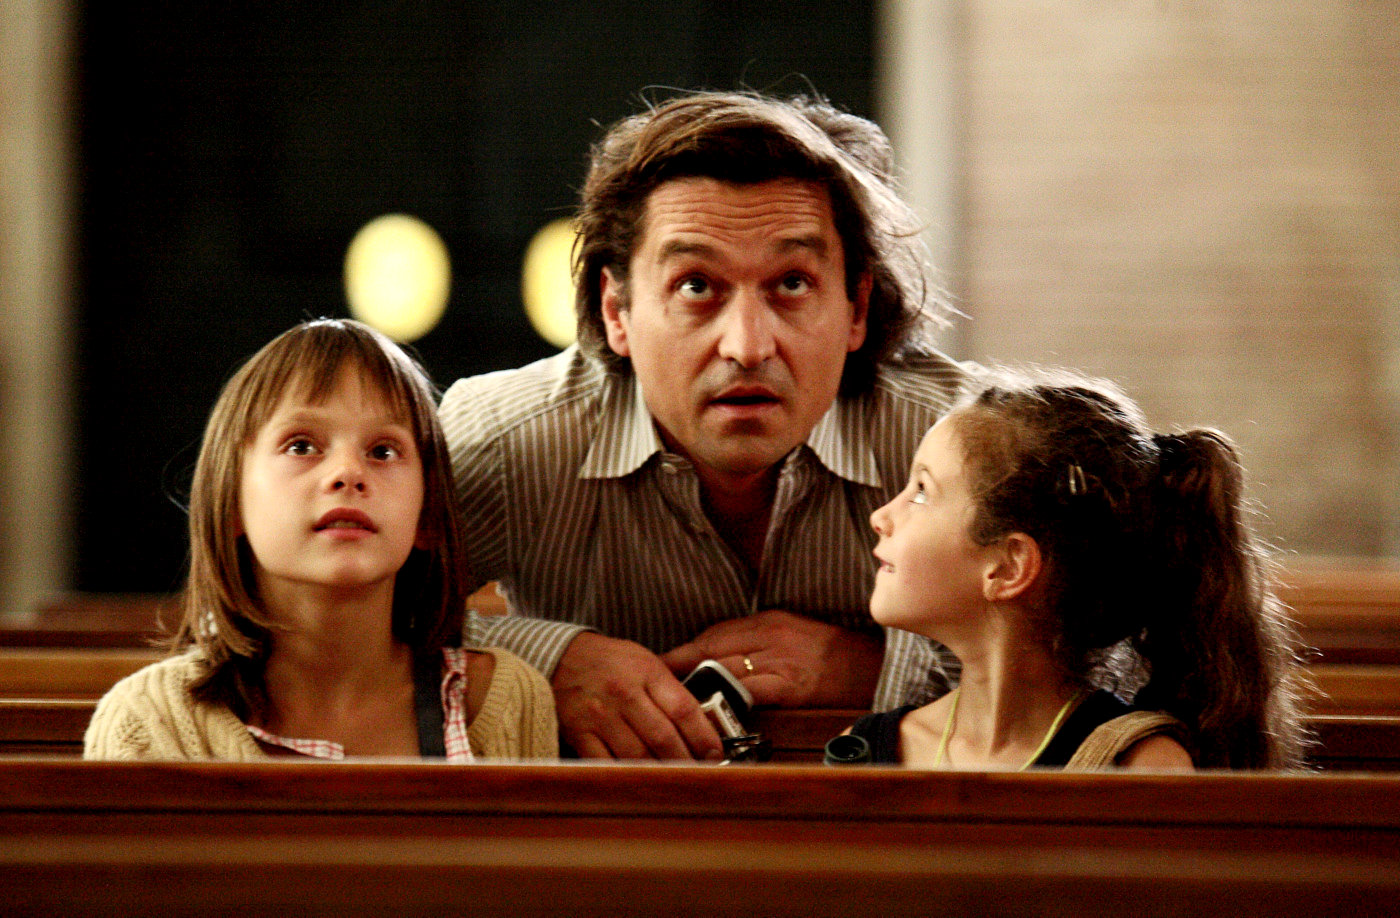 Alice Gautier, Louis-Do de Lencquesaing and Manelle Driss in IFC Films' The Father of My Children (2010)